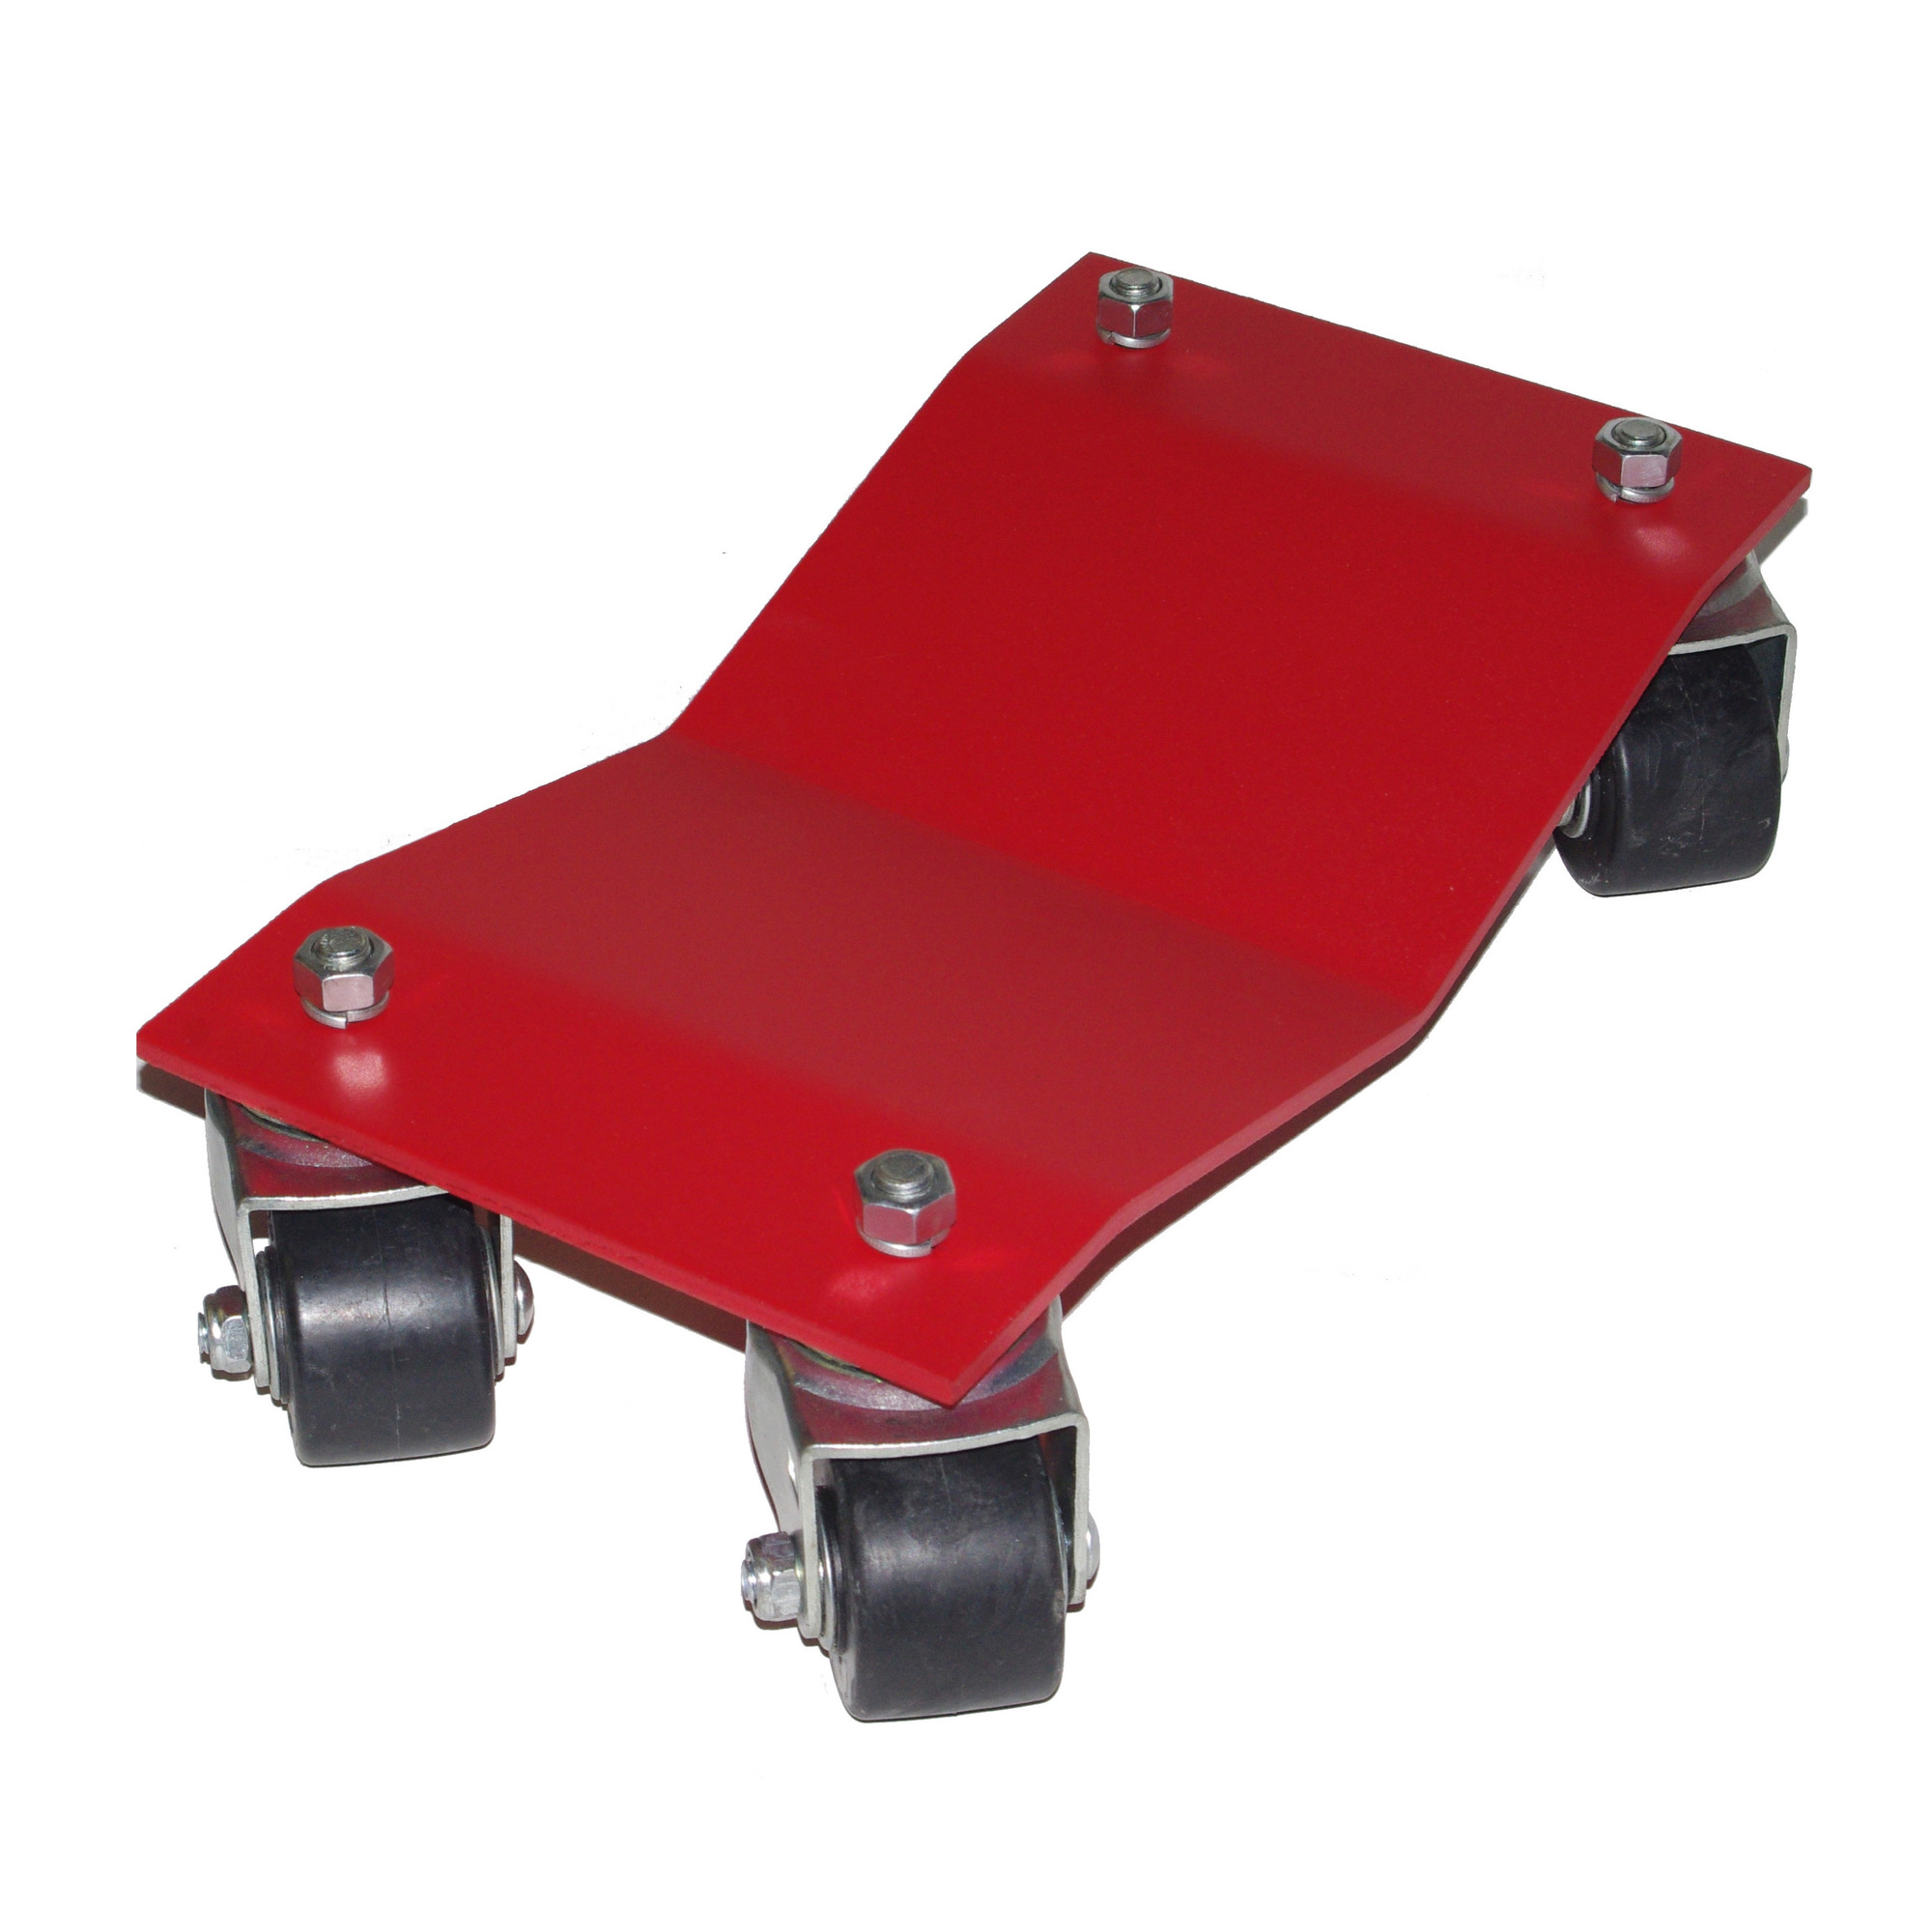 Merrick Industrial Dolly, 8Inchx16Inch Individual V-Grooved Heavy Duty, Capacity 2500 lb, Material Steel, Included (qty.) 1 Model M998113